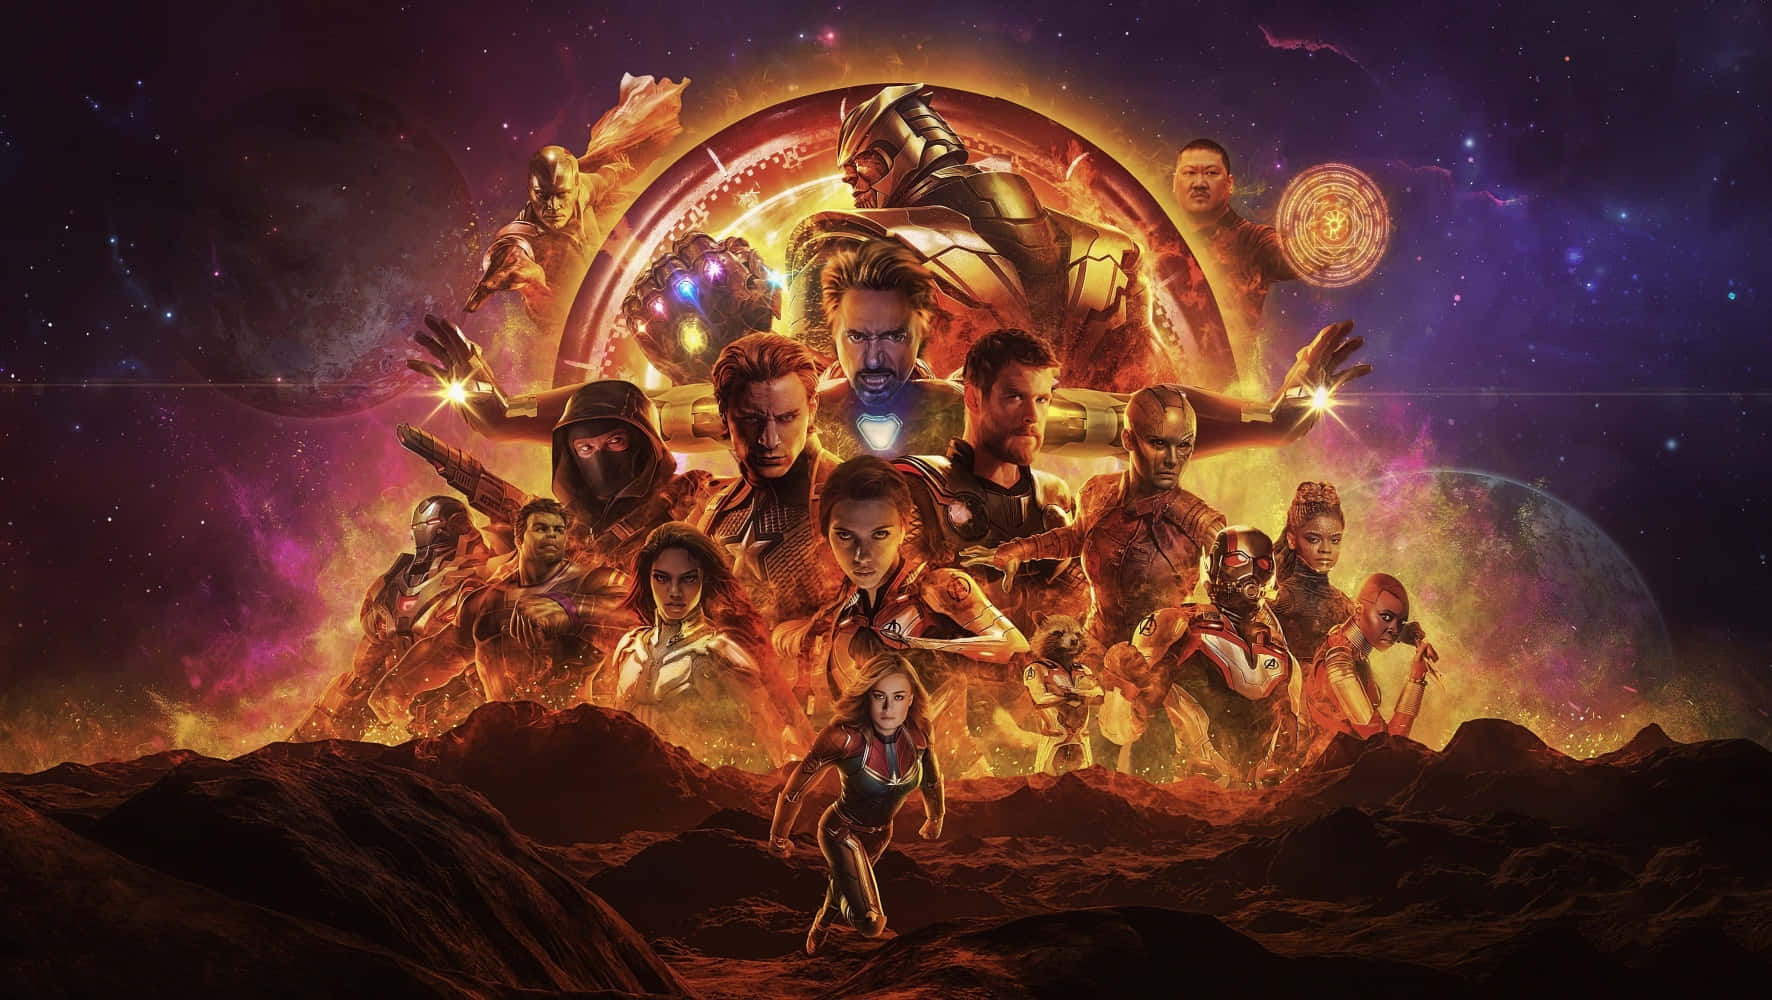 Heroes stand strong and united in Avengers: Endgame